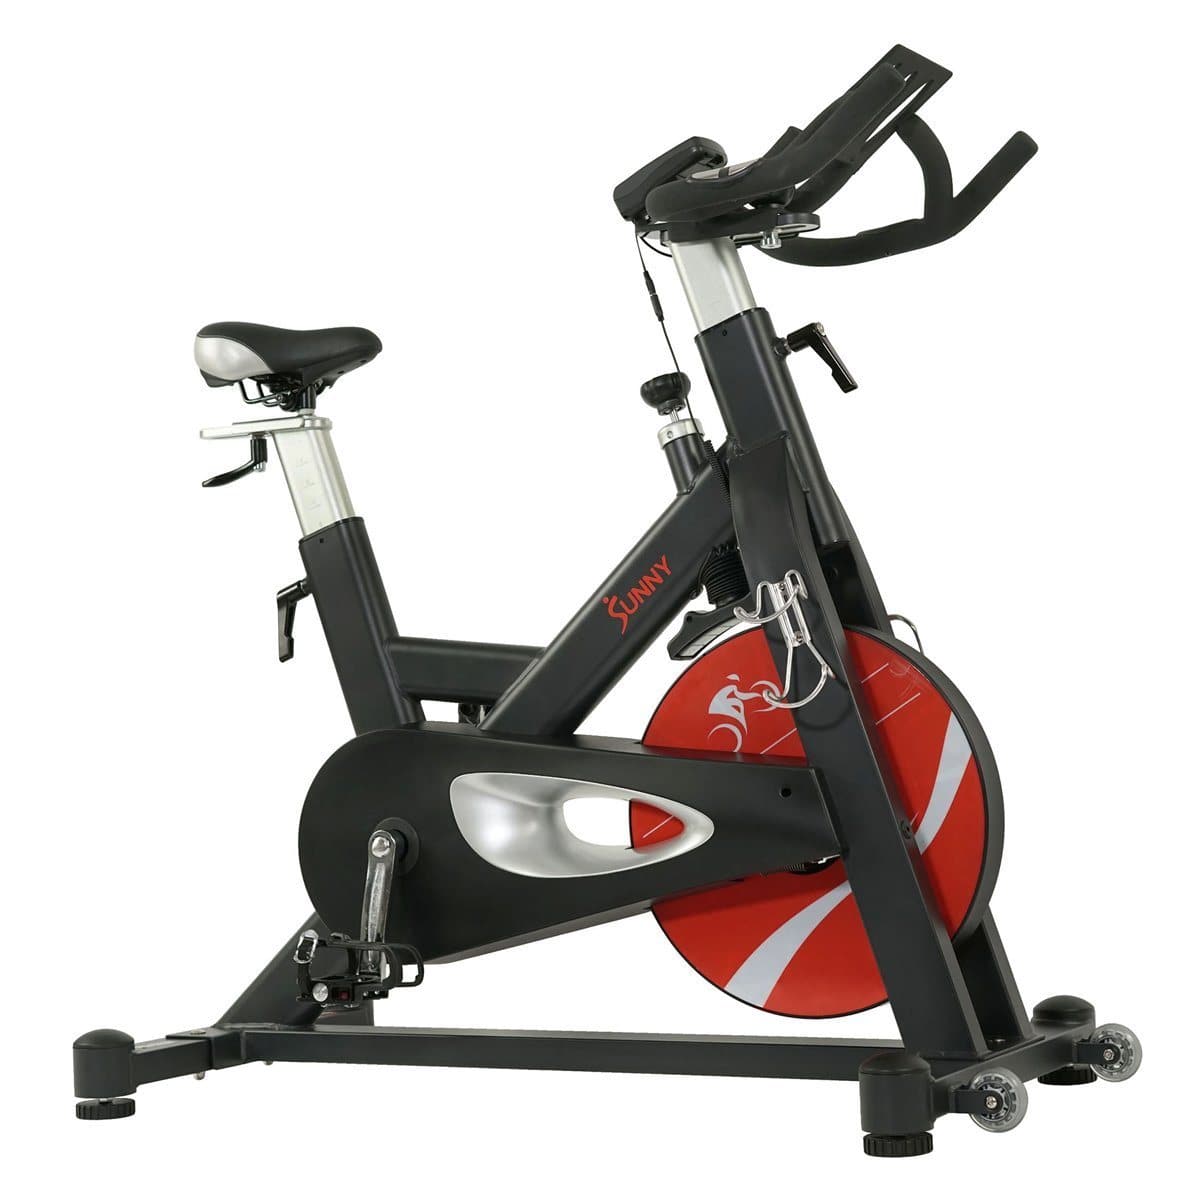 Evolution Pro II Magnetic Indoor Cycle Cardio Training Sunny Health and Fitness 